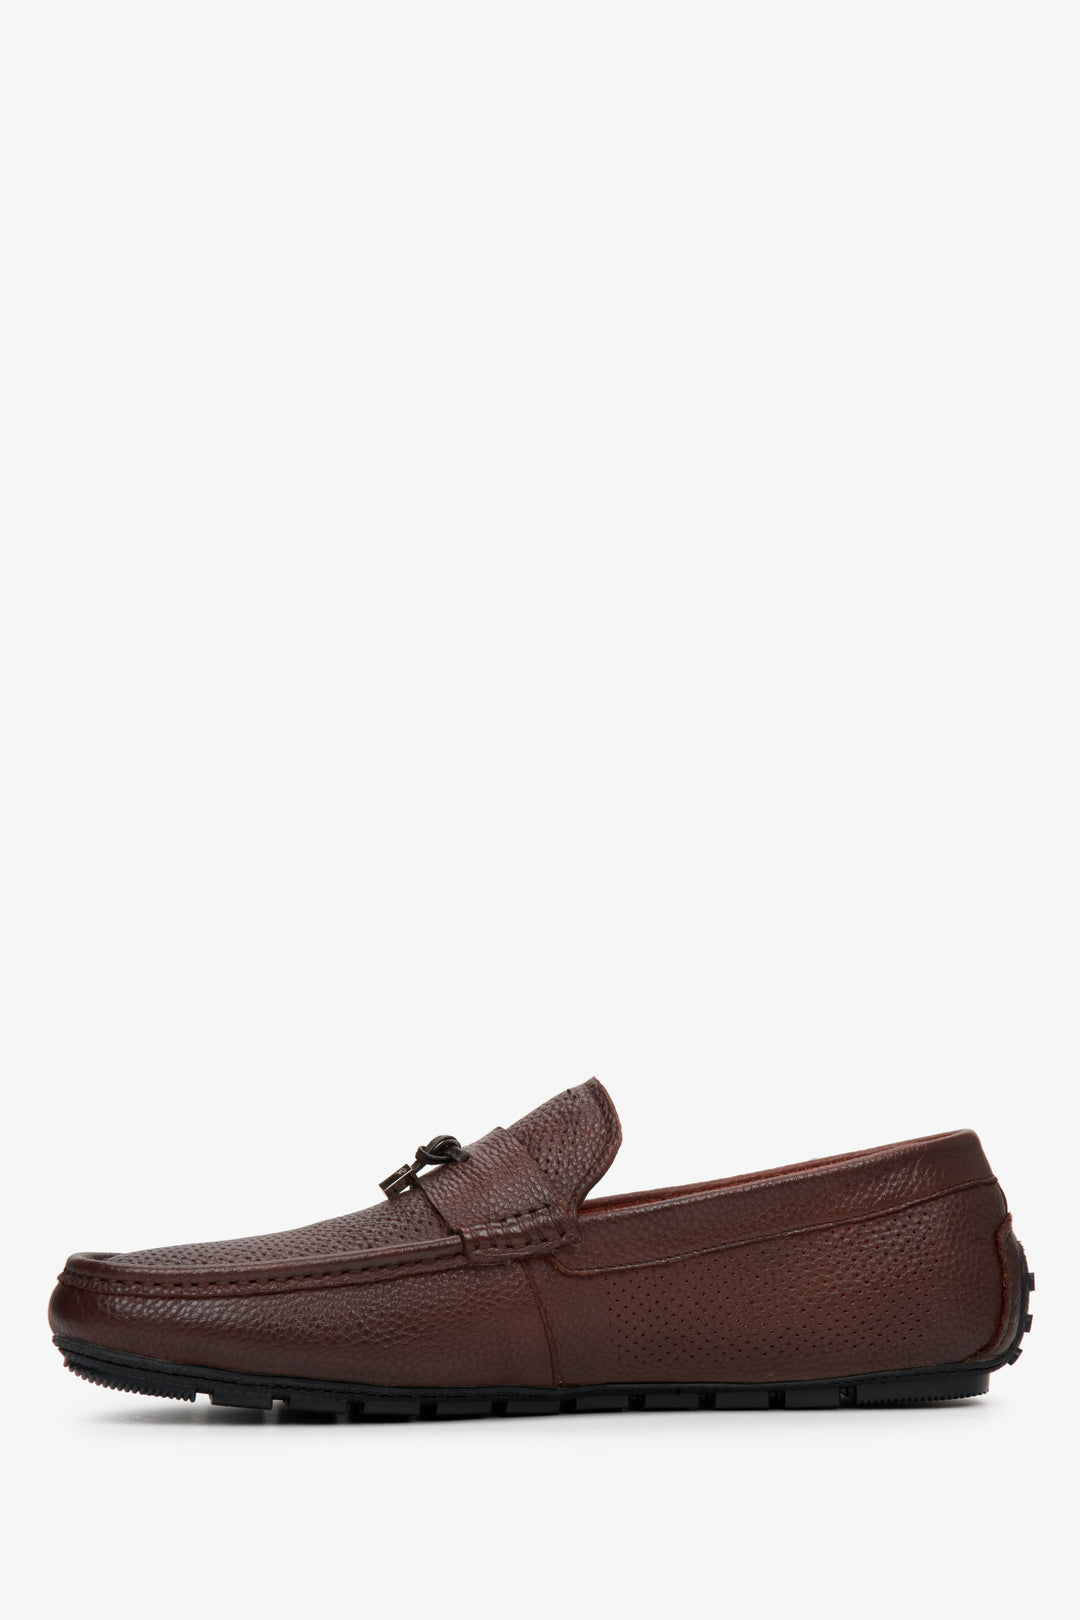 Men's brown leather loafers by Estro for fall - shoe profile.